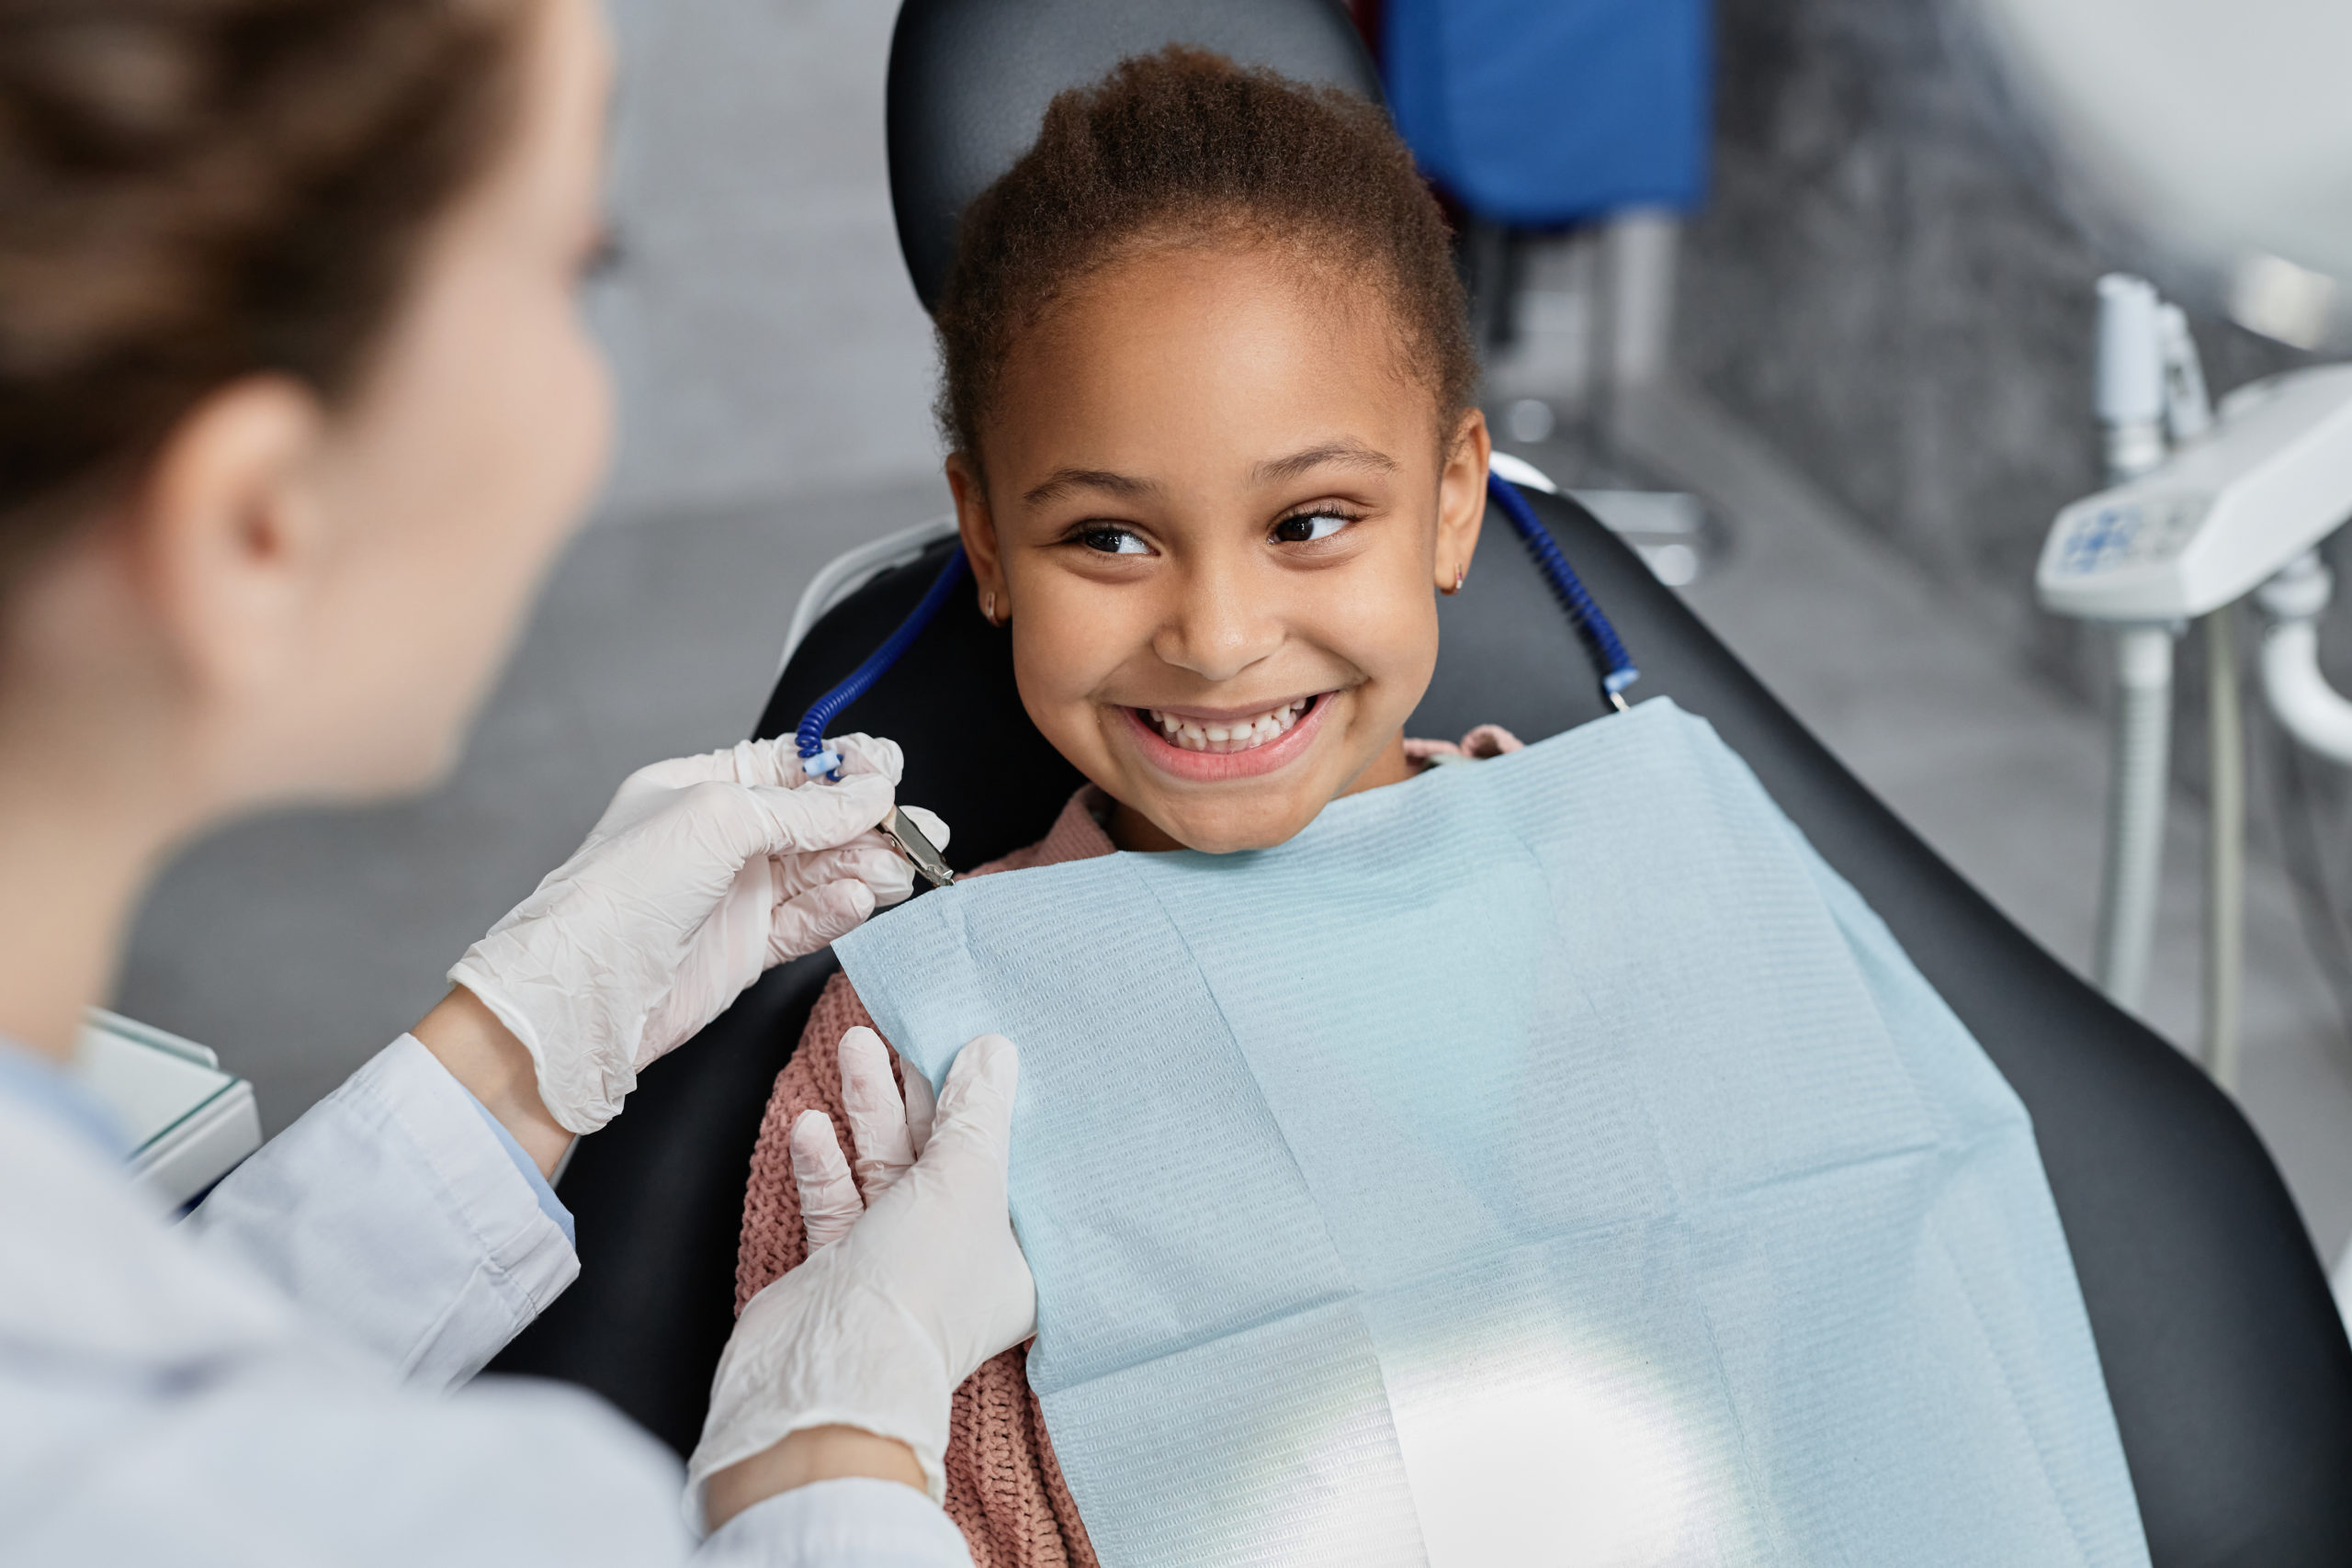 Portrait of smiling little girl in dental chair with nurse preparing her for teeth check up, copy space